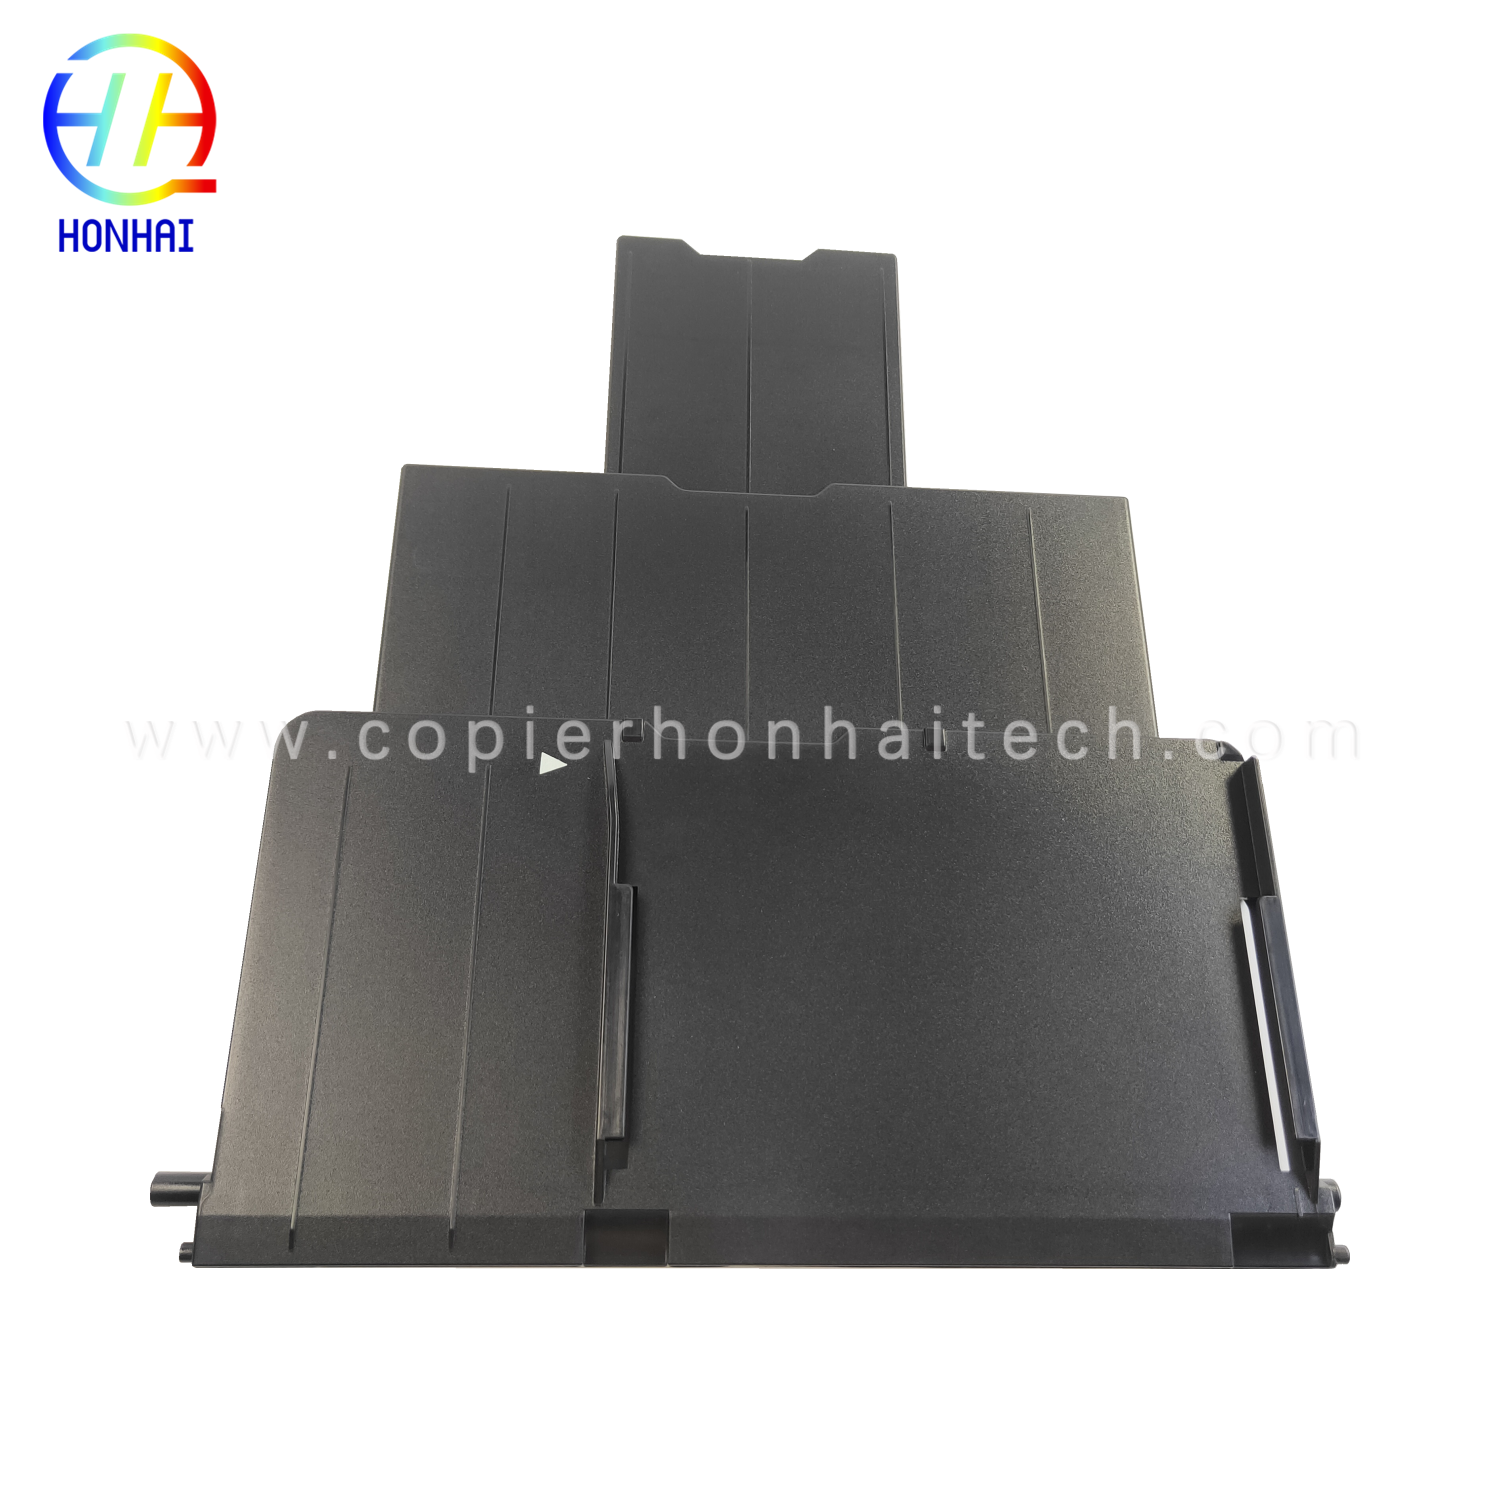 Paper supporting tray for Epson R330 T50 P50 L800 L801 L805